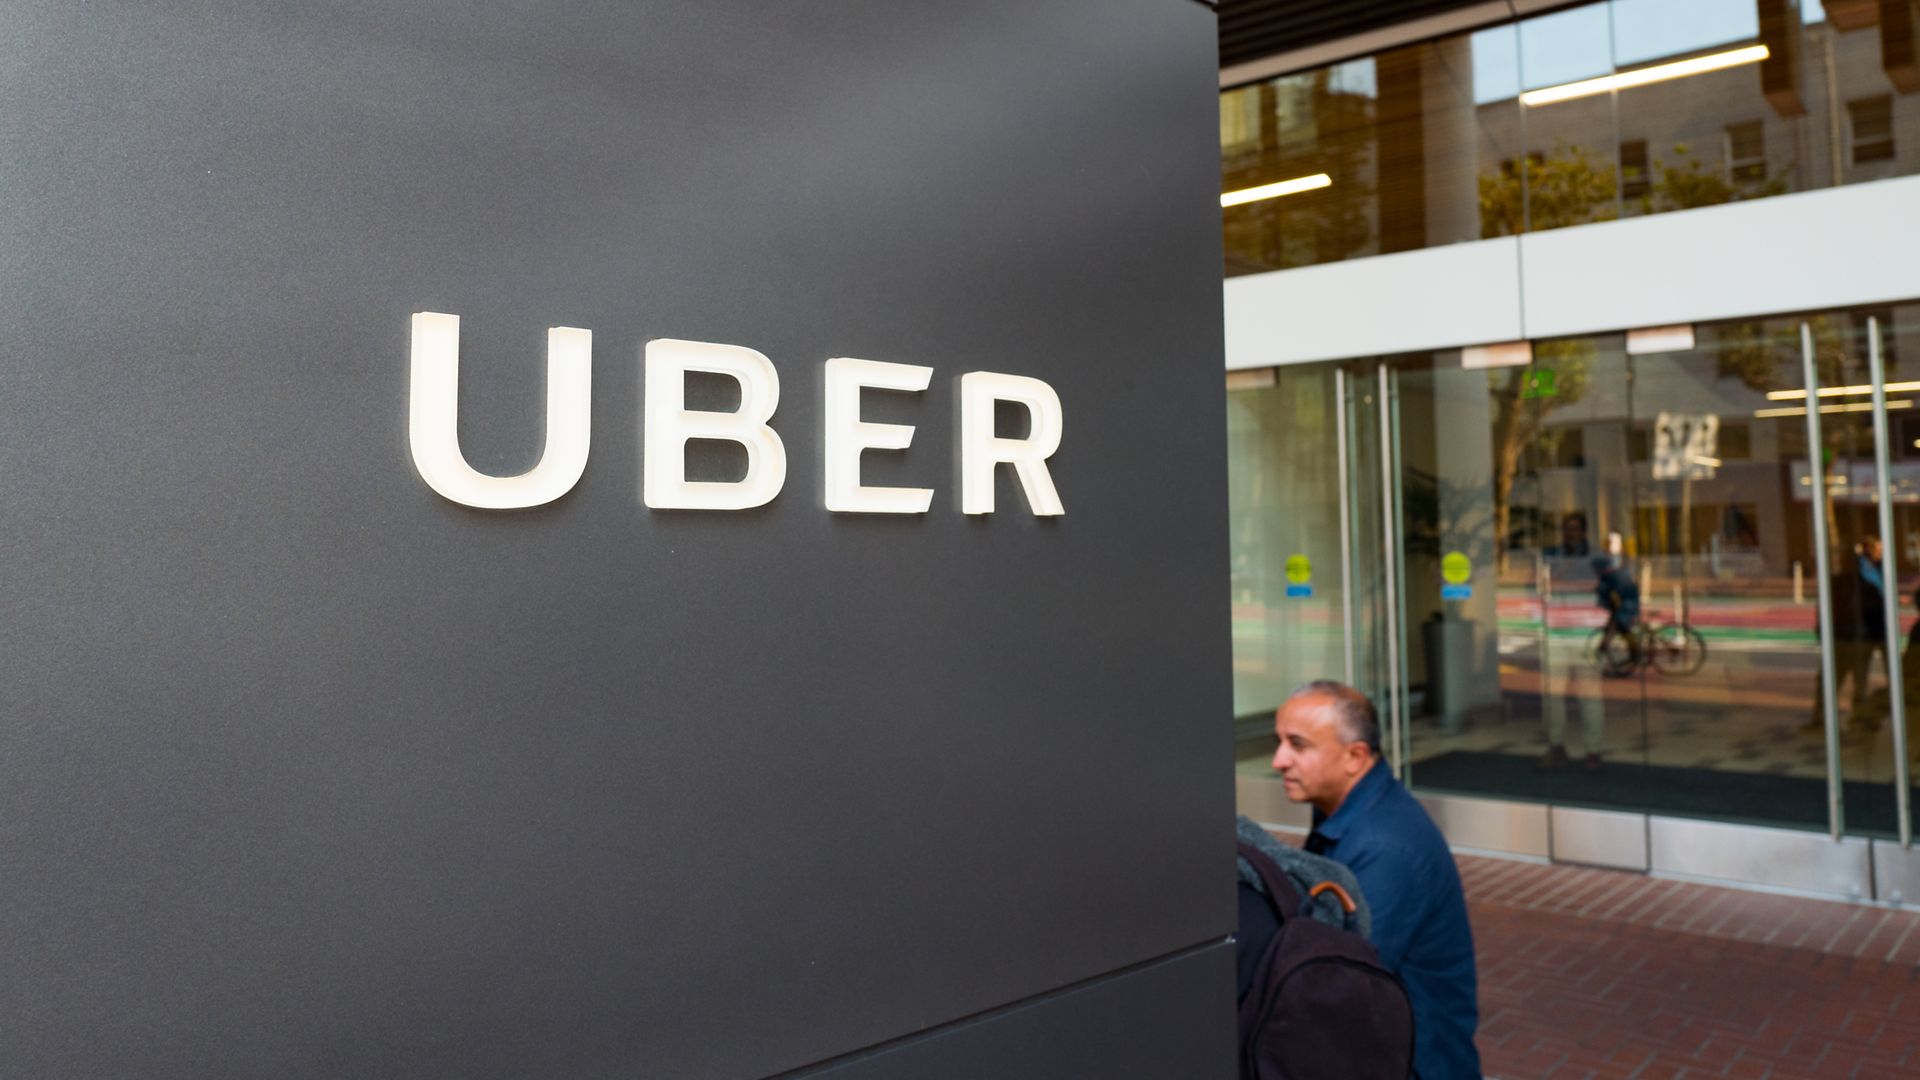 Uber headquarters in San Francisco, California. Photo: Smith Collection/Gado/Getty Images